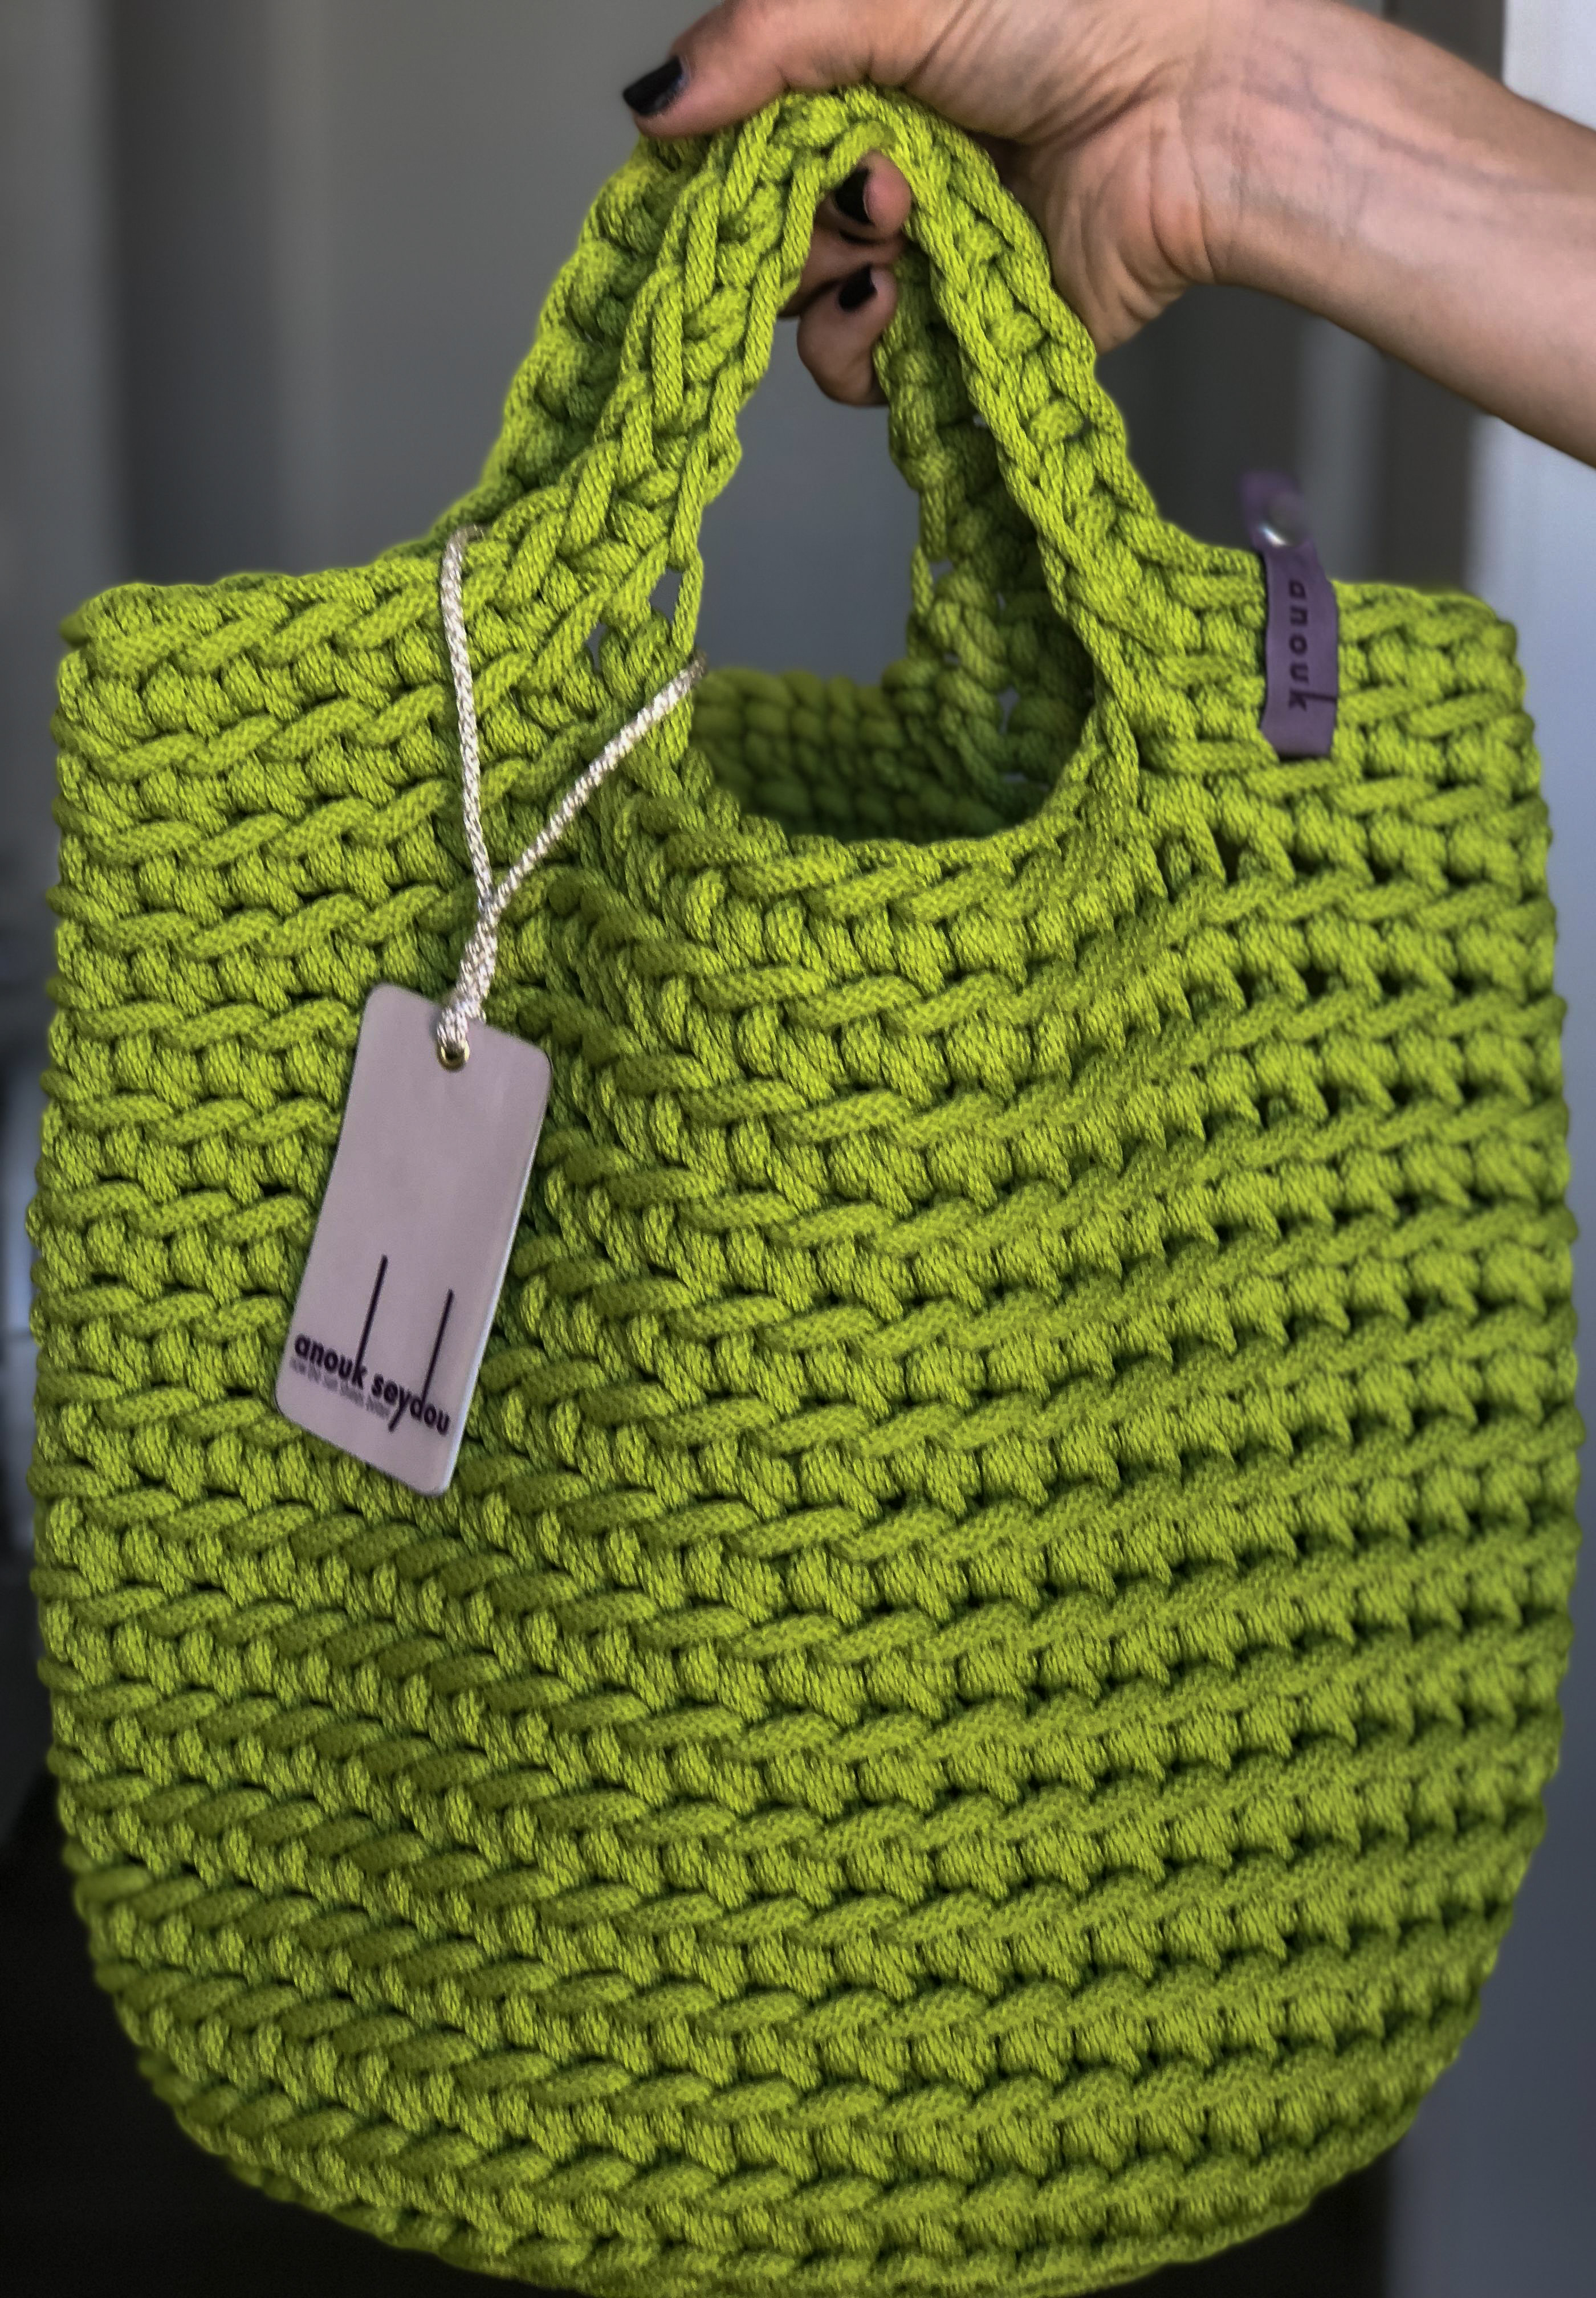 44+ Wonderful Free Pattern Crochet Bags Project Ideas You Have Never